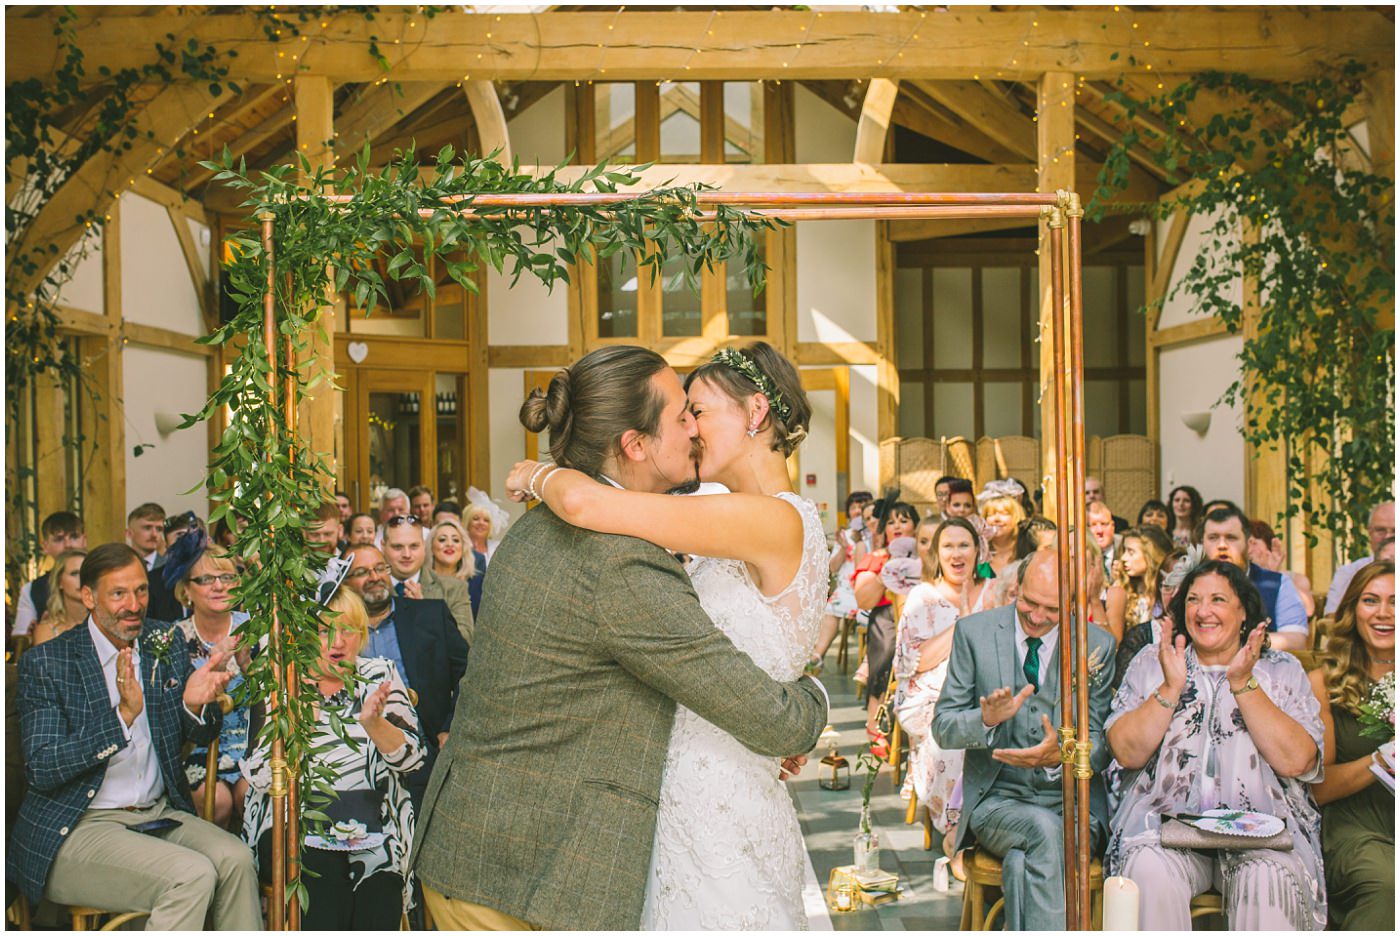 Bride and Groom kiss in wedding ceremony in knutsford